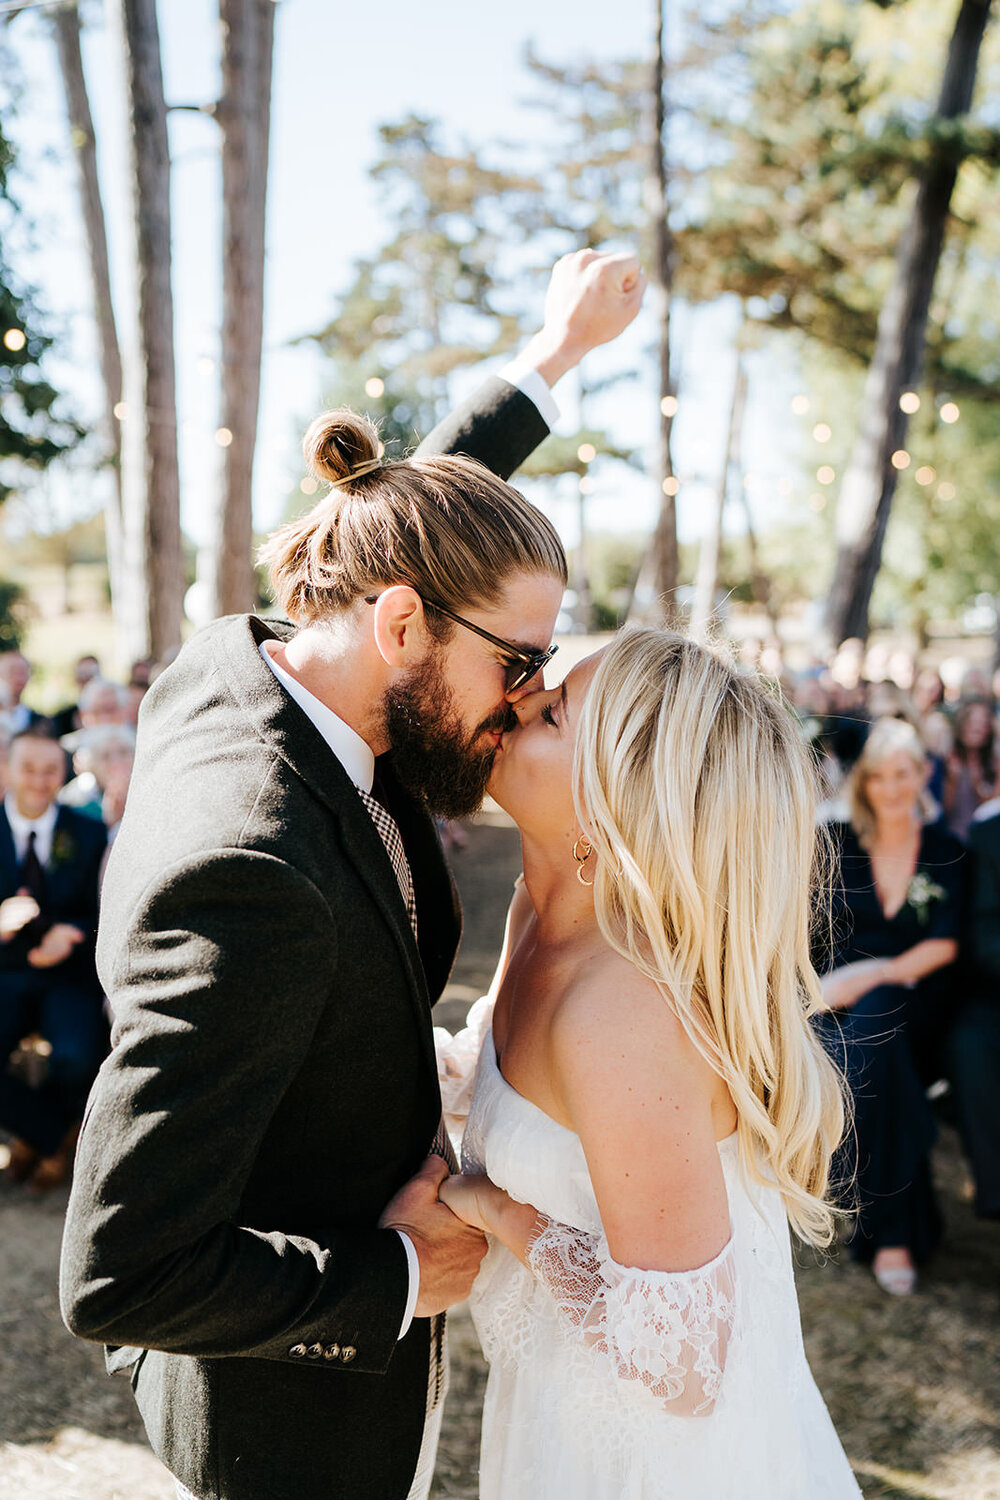 Groom pumps his fist into the air as he kisses his bohemian bride for very first time during civil tipi wedding ceremony